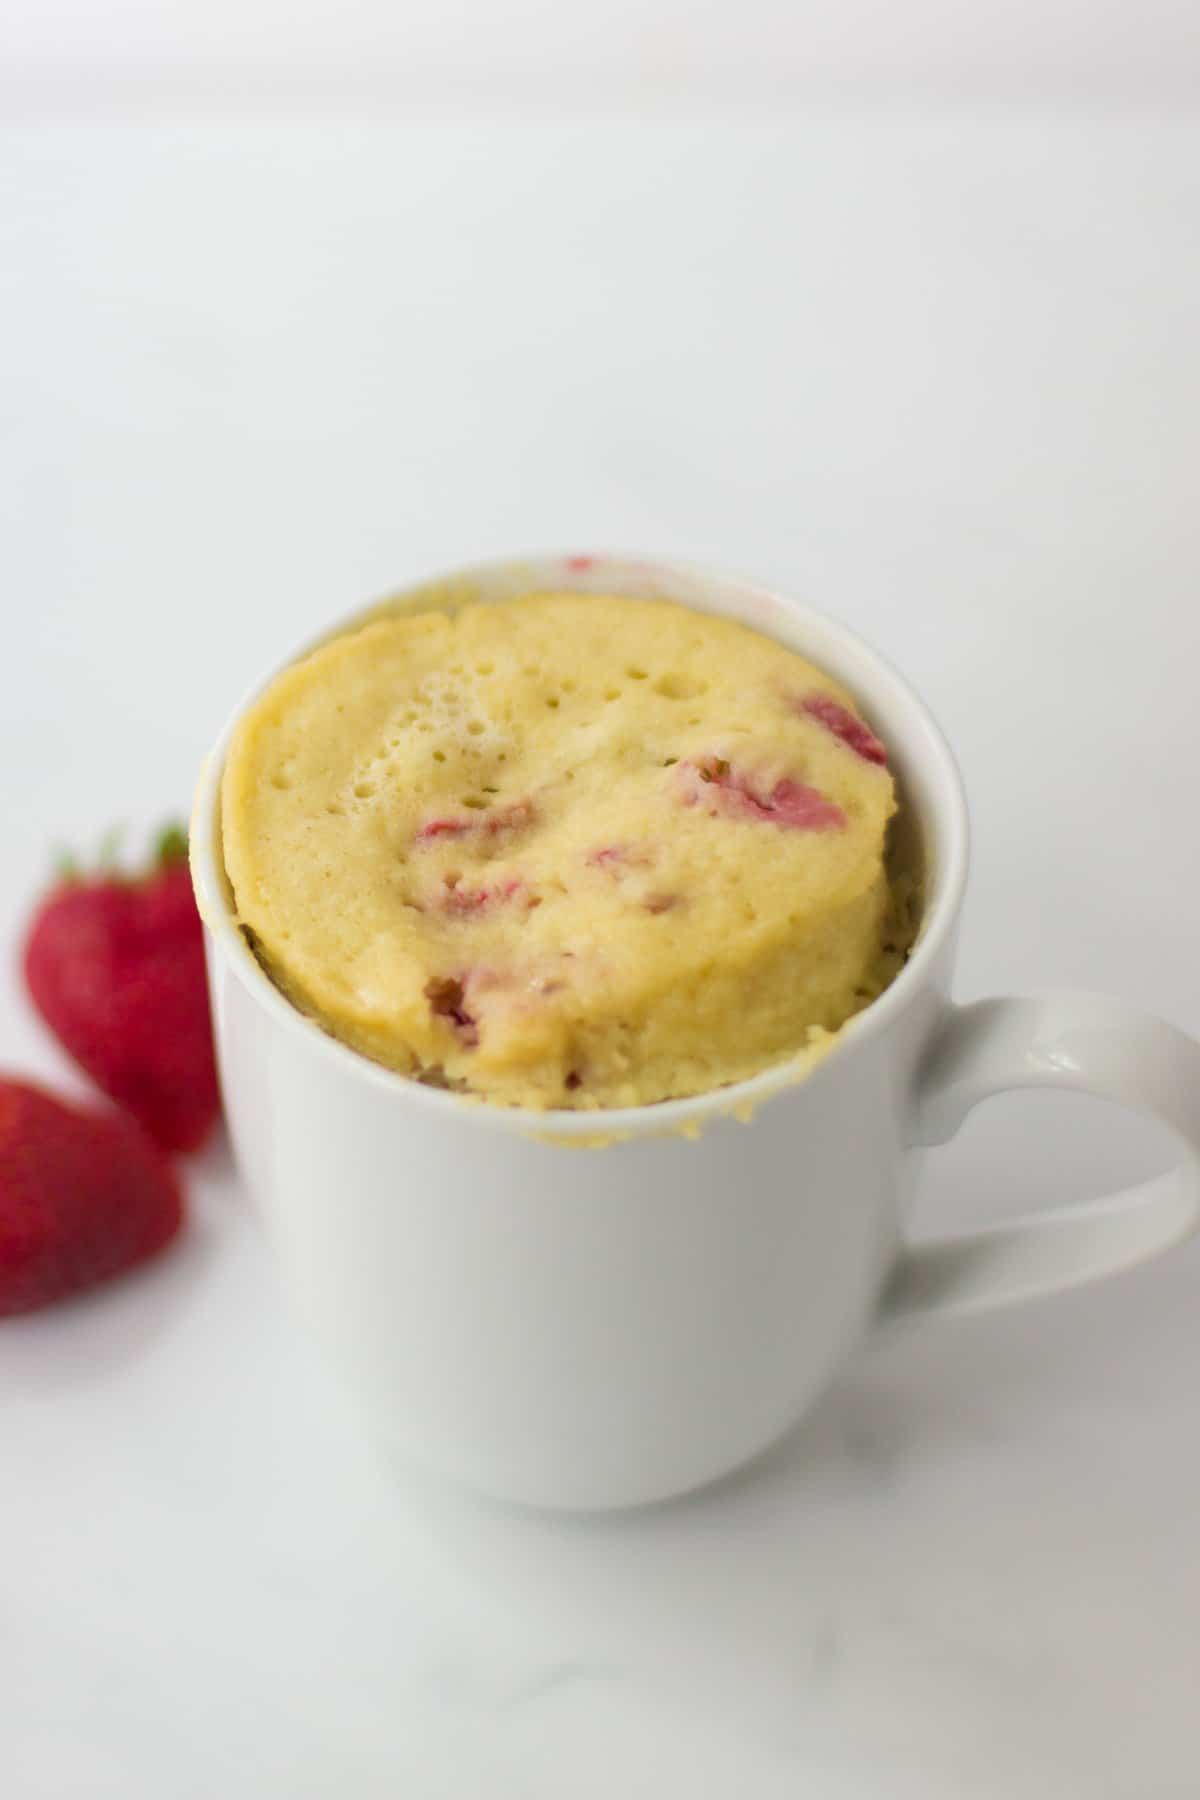 Microwaved mug cake with strawberries in the background.